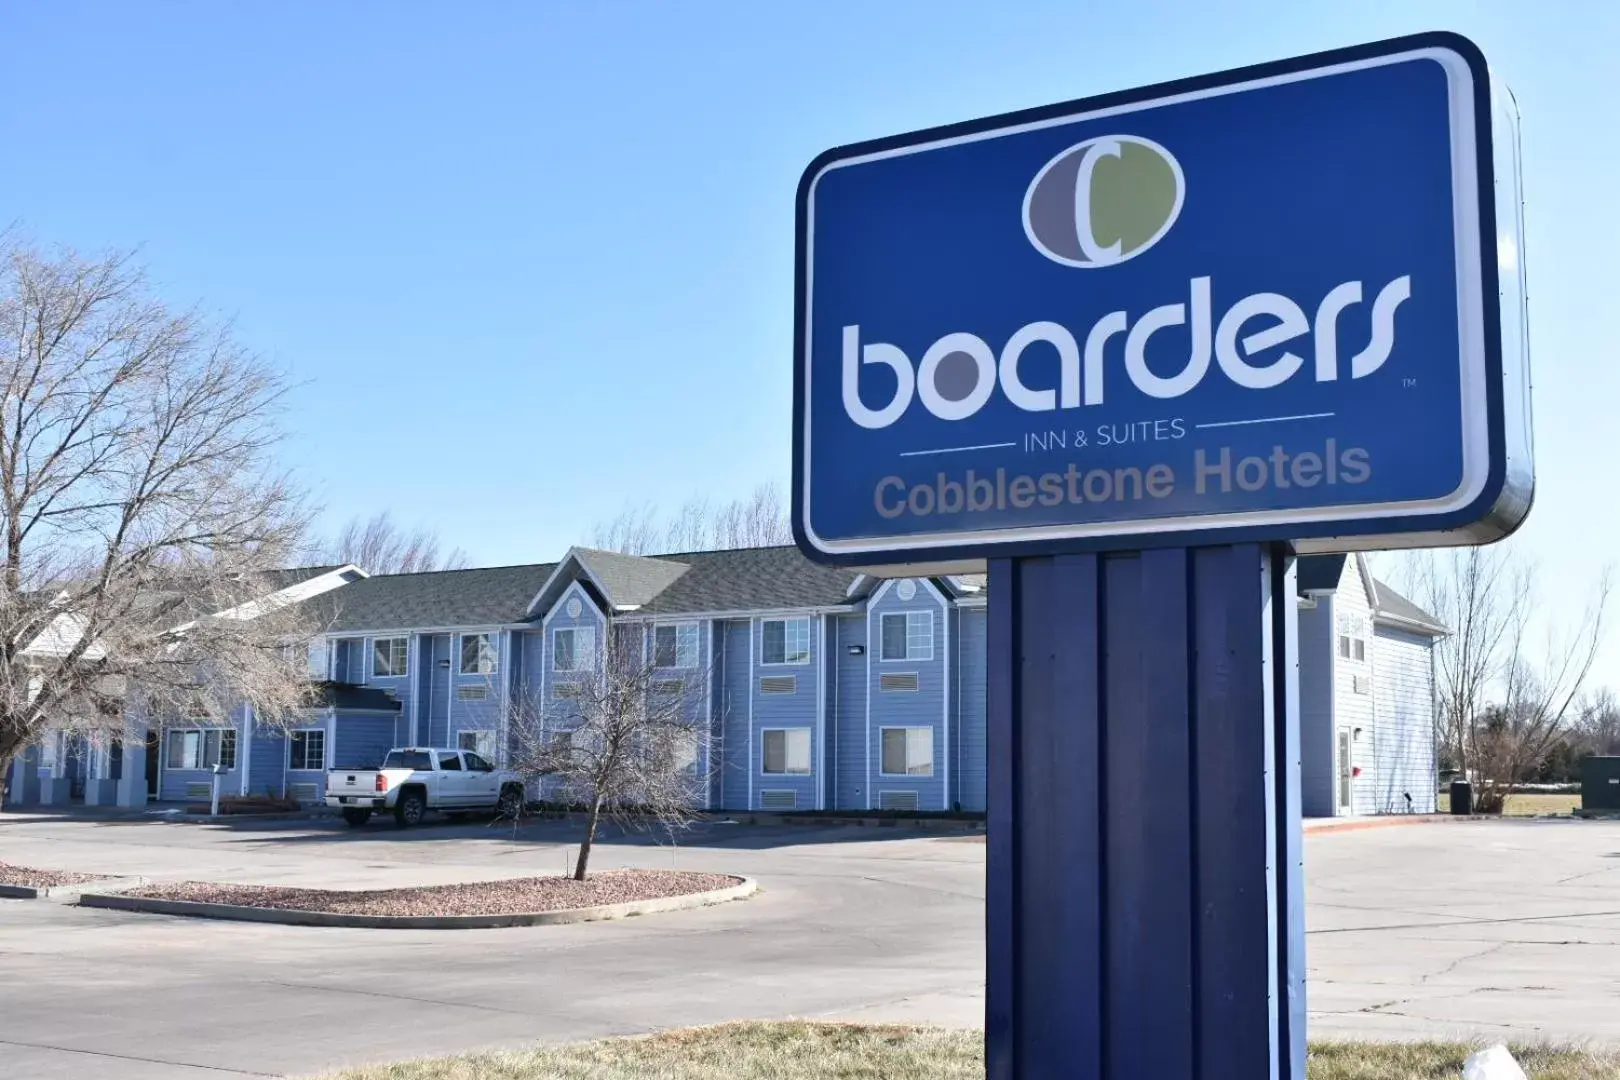 Property Building in Boarders Inn & Suites by Cobblestone Hotels - Brush